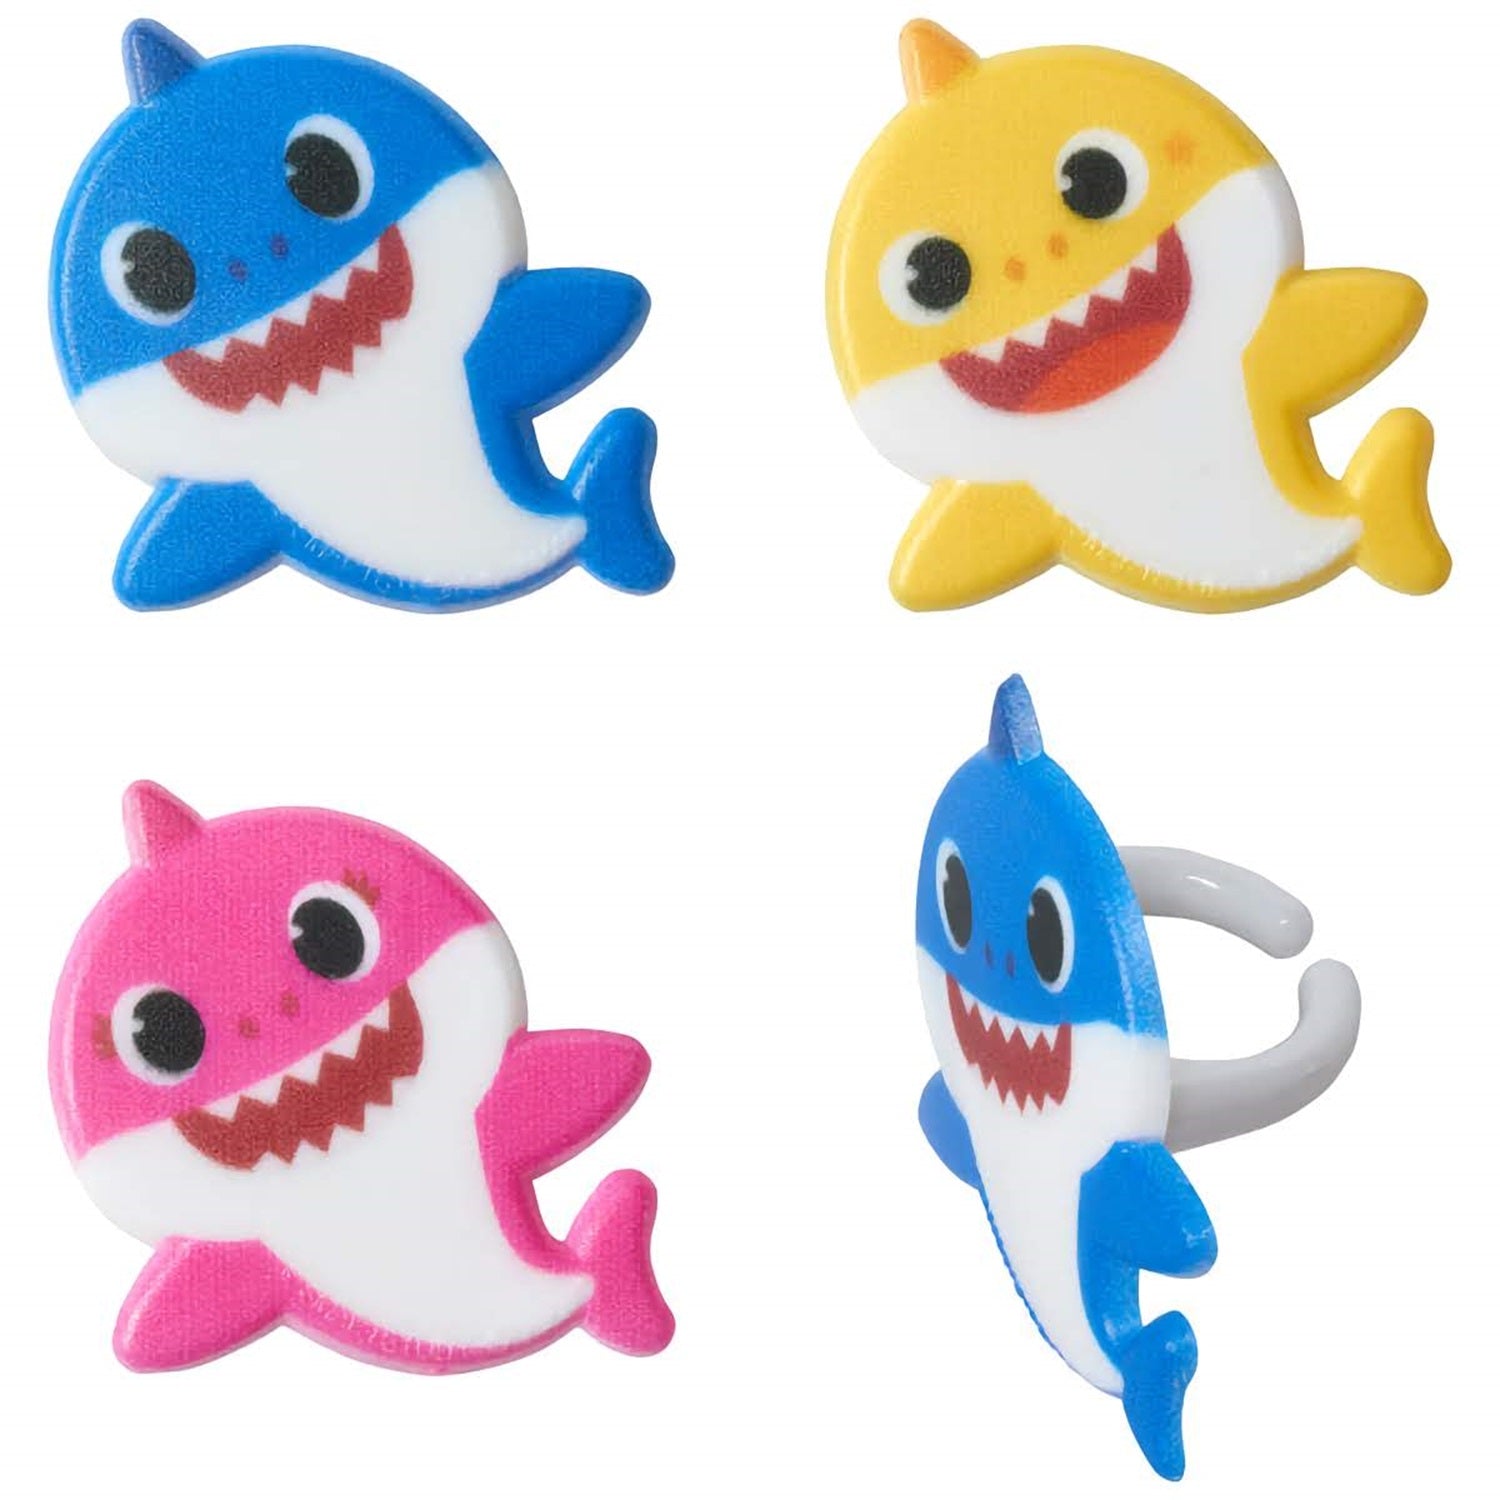 Adorable Baby Shark cupcake topper rings, featuring the catchy characters in bright colors, sure to make a splash at any kid's party, get them at Lynn's Cake, Candy, and Chocolate Supplies.